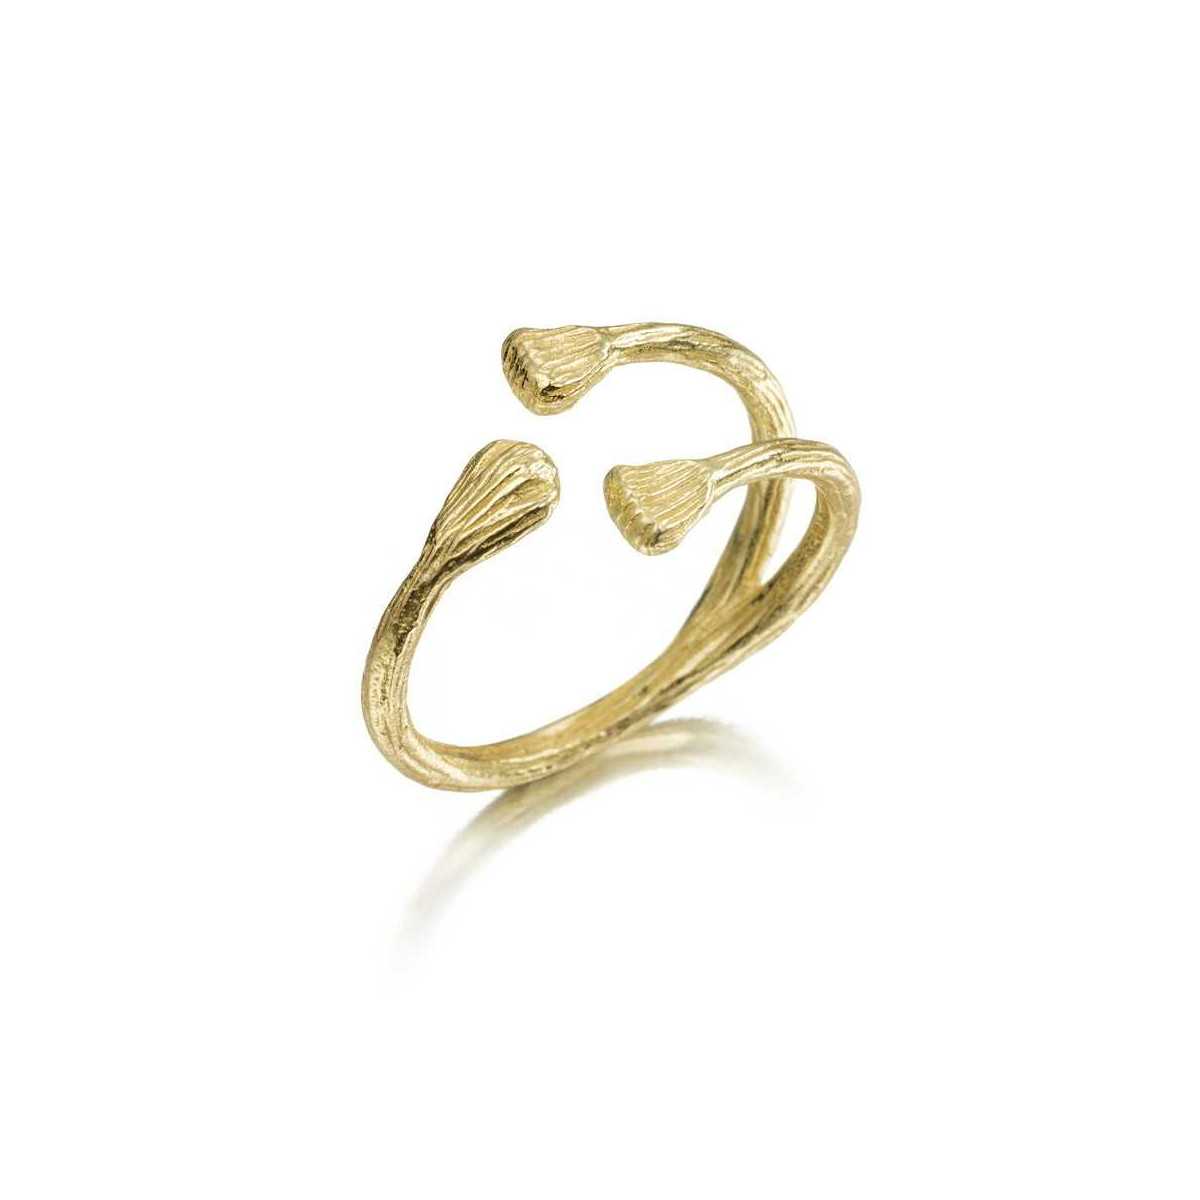 NUGGETS Ring in Silver. 18k Gold Vermeil